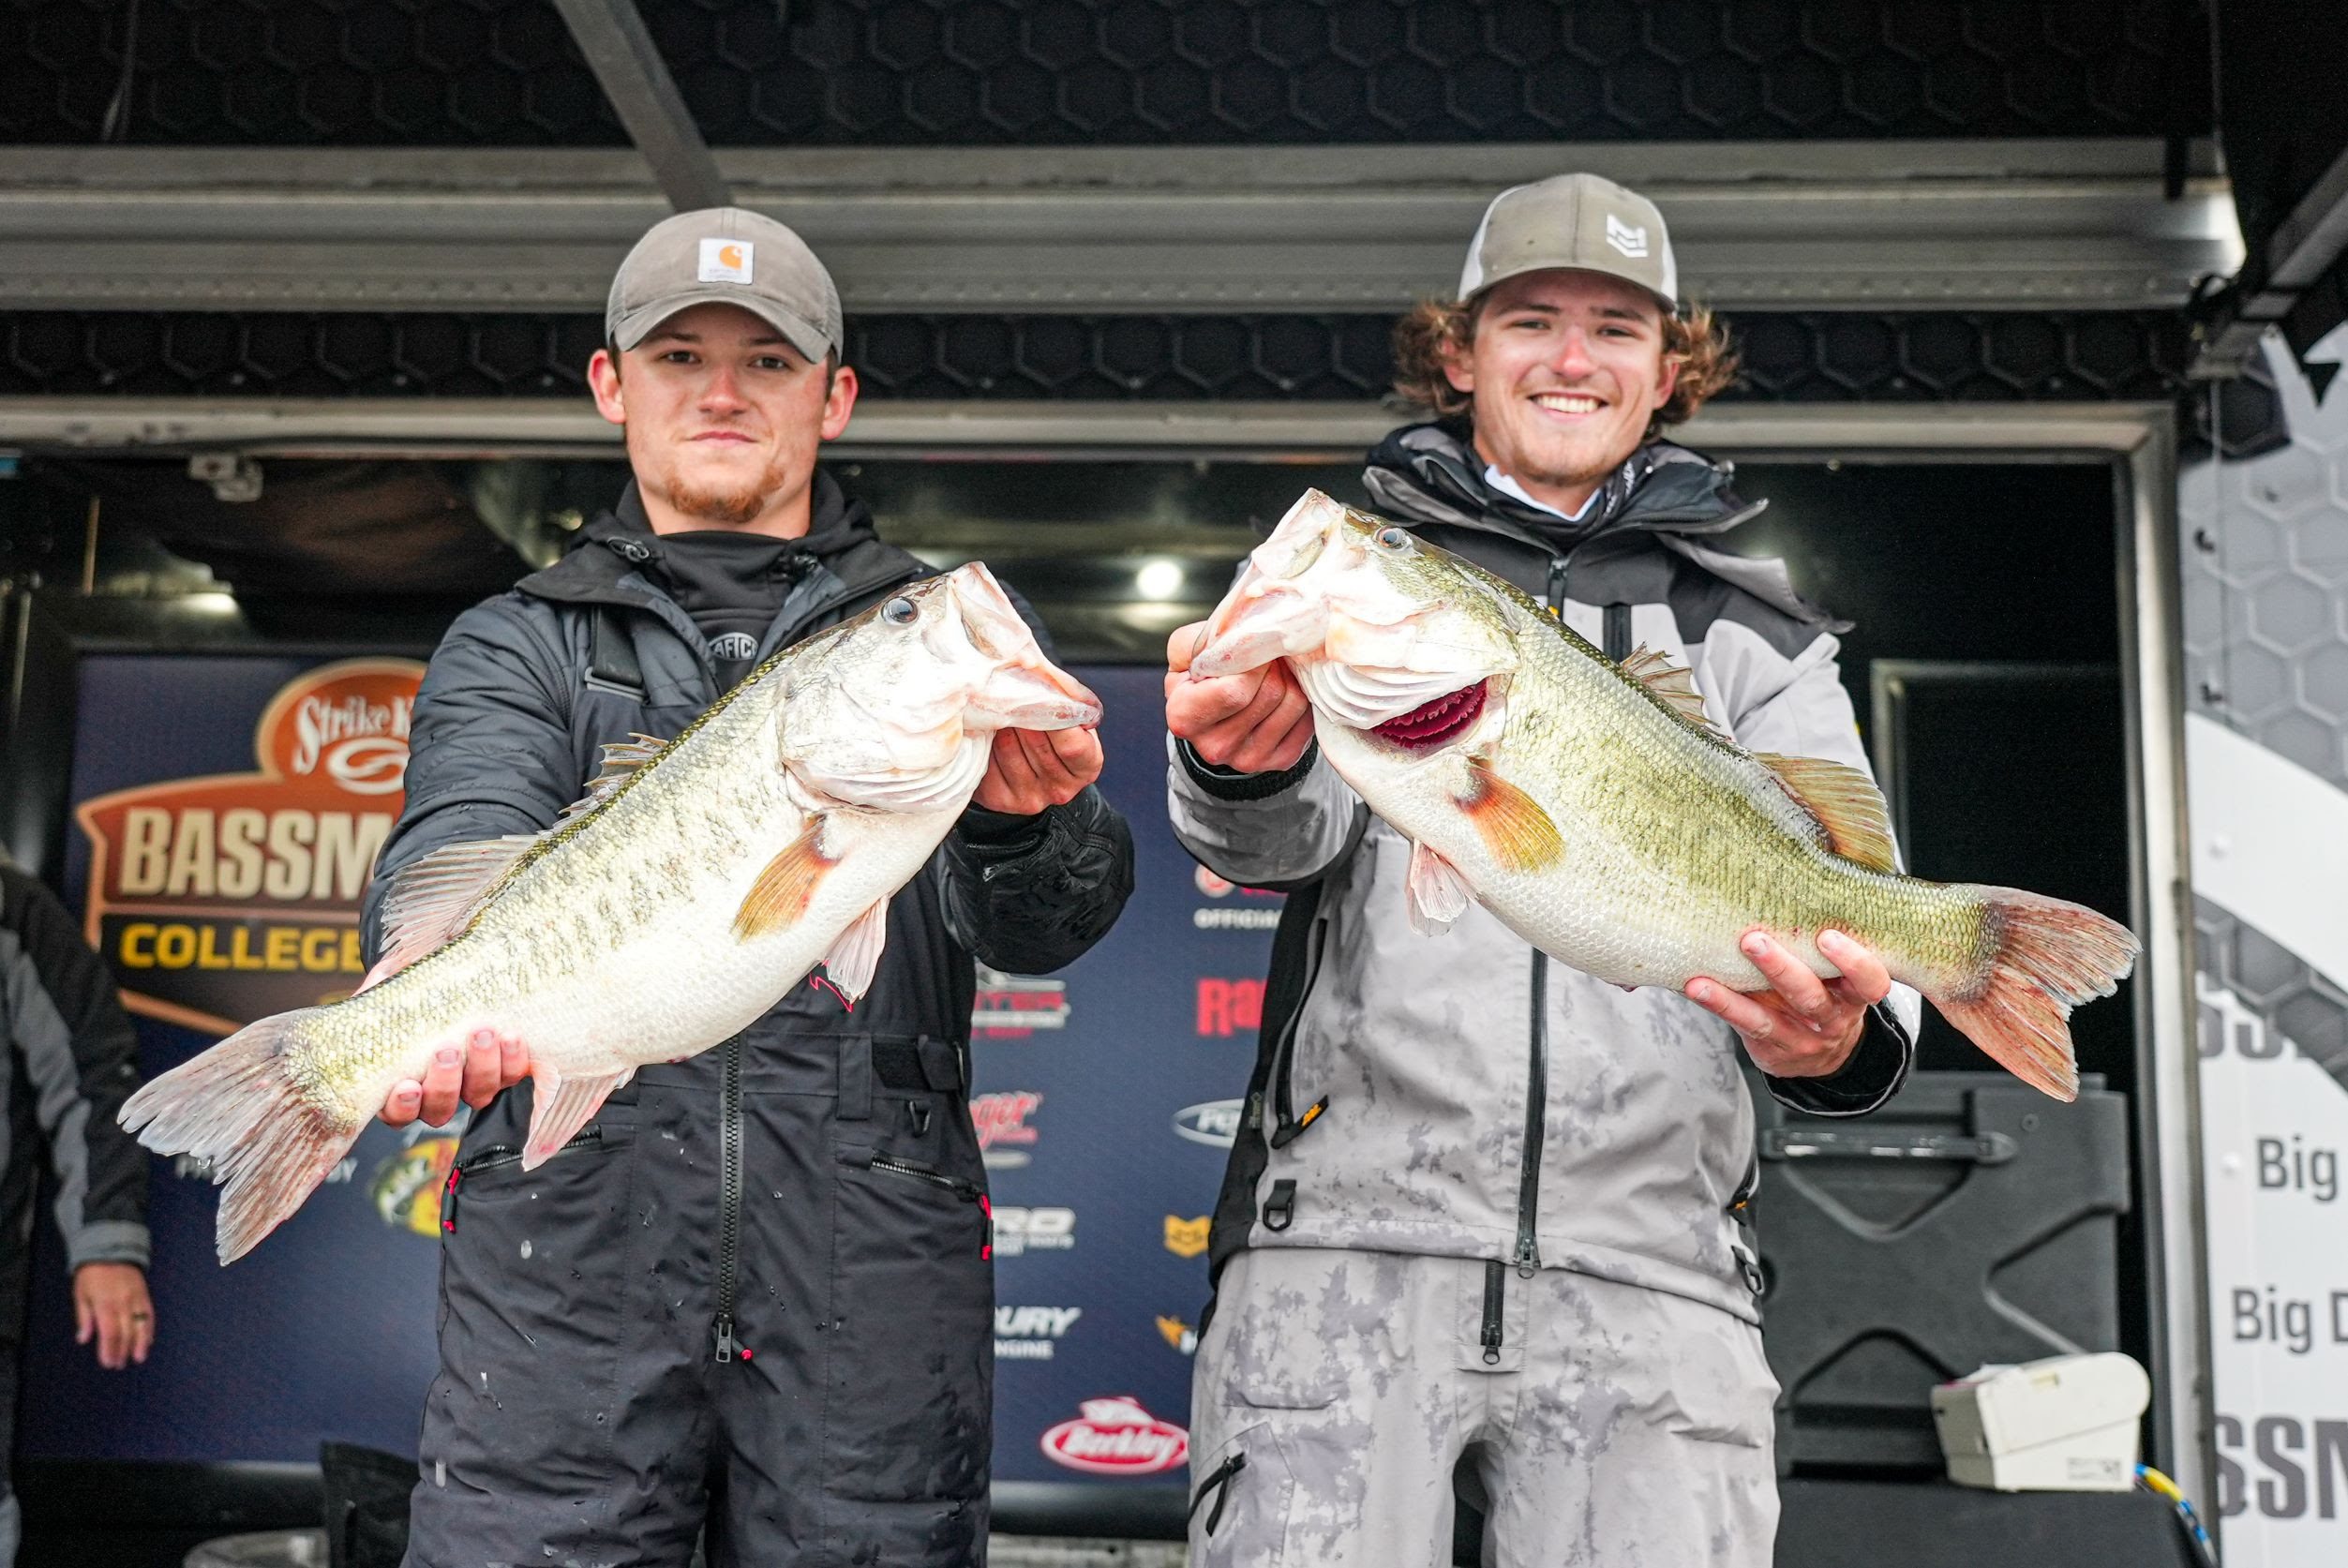 Kentucky Christian’s Messer Brothers Claim Record-Breaking Win At Bassmaster College Series On Harris Chain